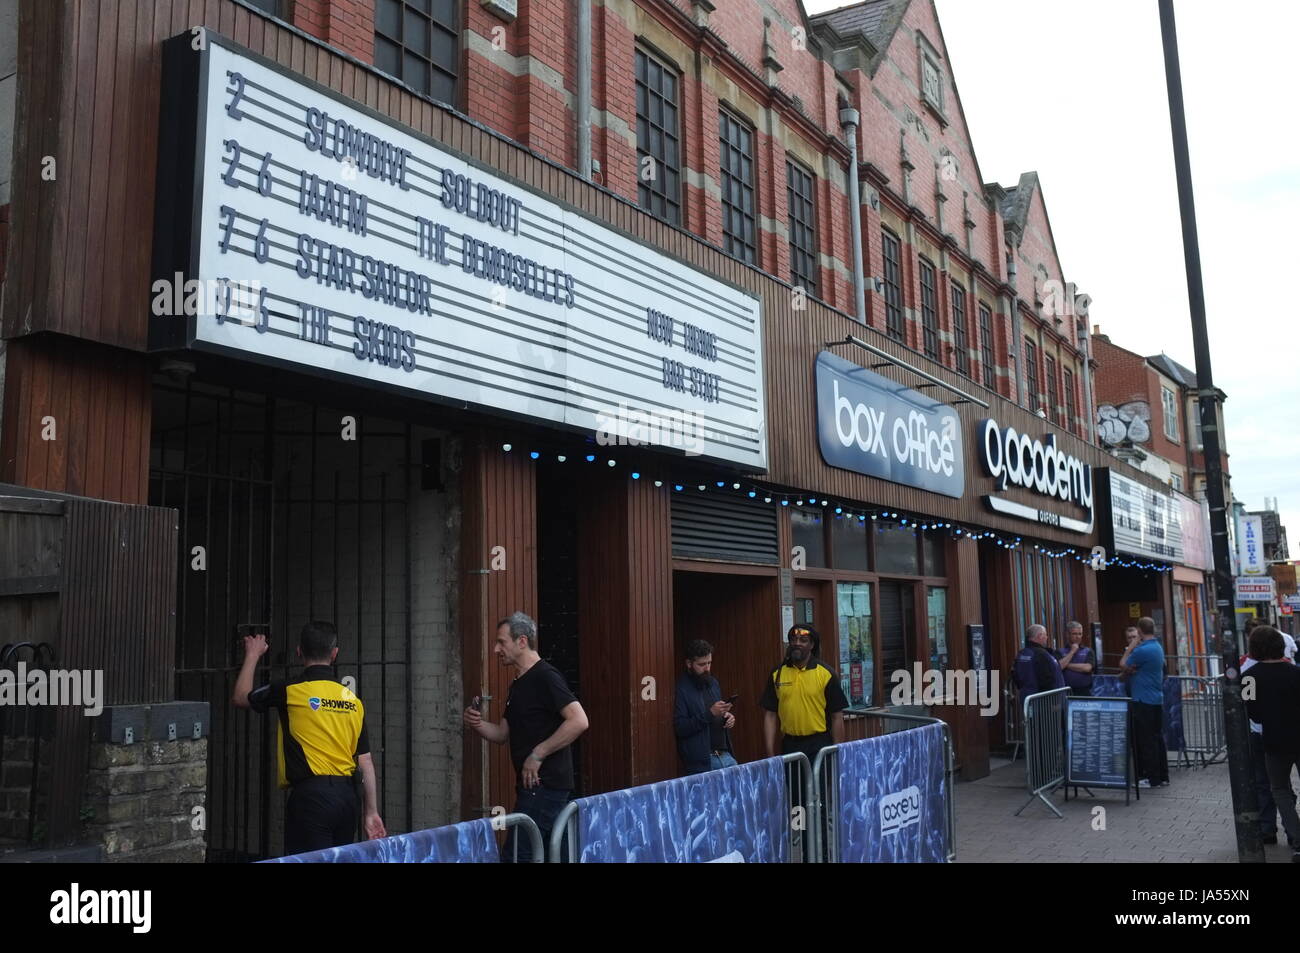 Outside the O2 Academy concert venue in Oxford, England, United Kingdom. June 2, 2017. Stock Photo